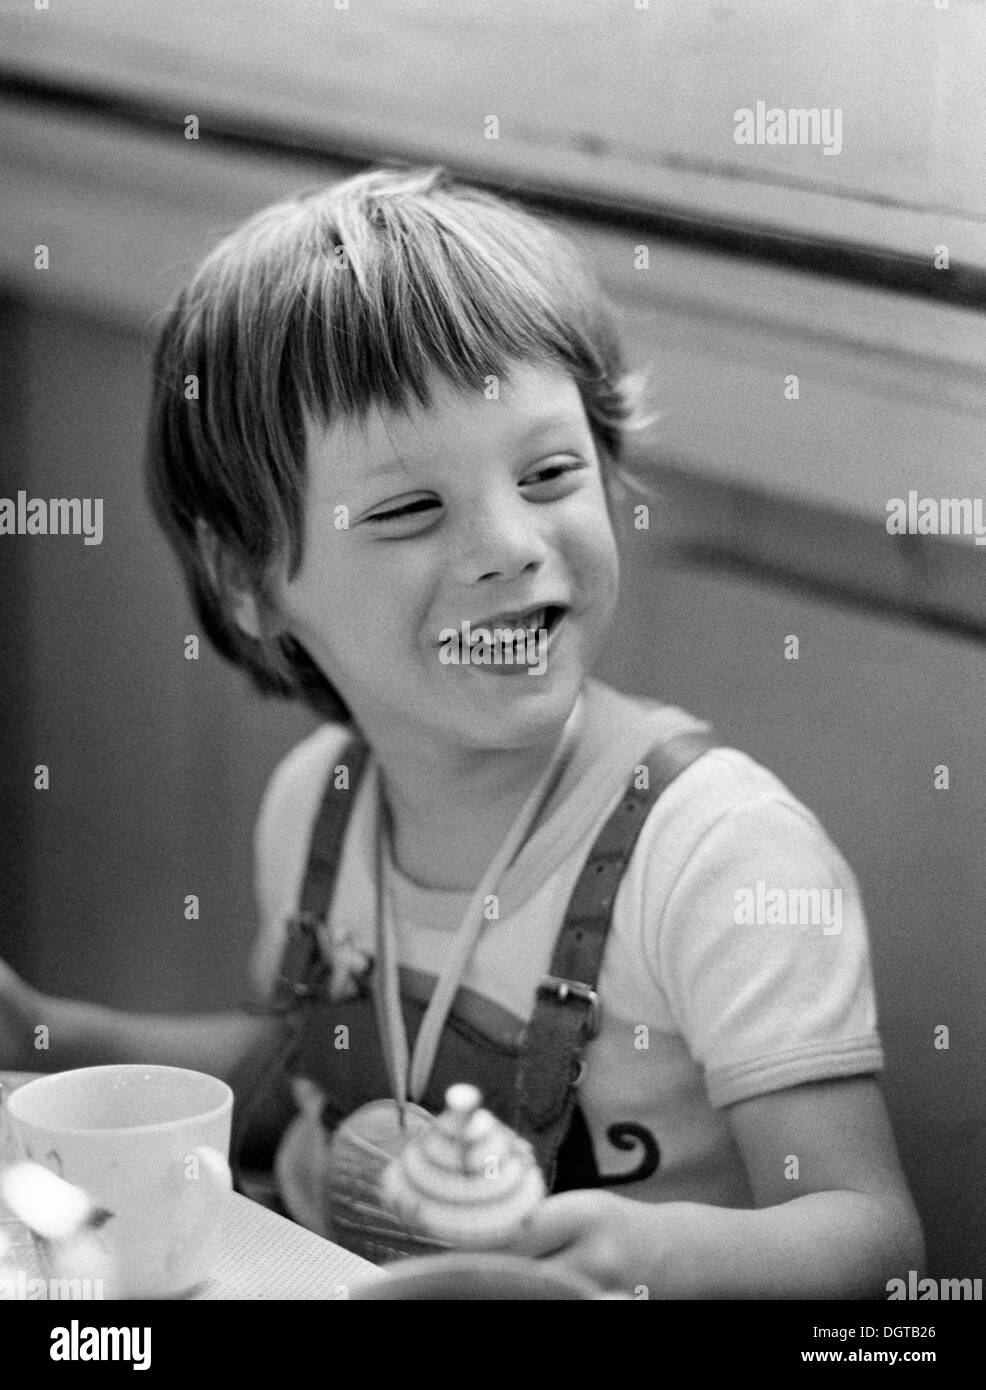 Five-year-old boy, portrait, Leipzig, East Germany, historical photograph around 1976 Stock Photo